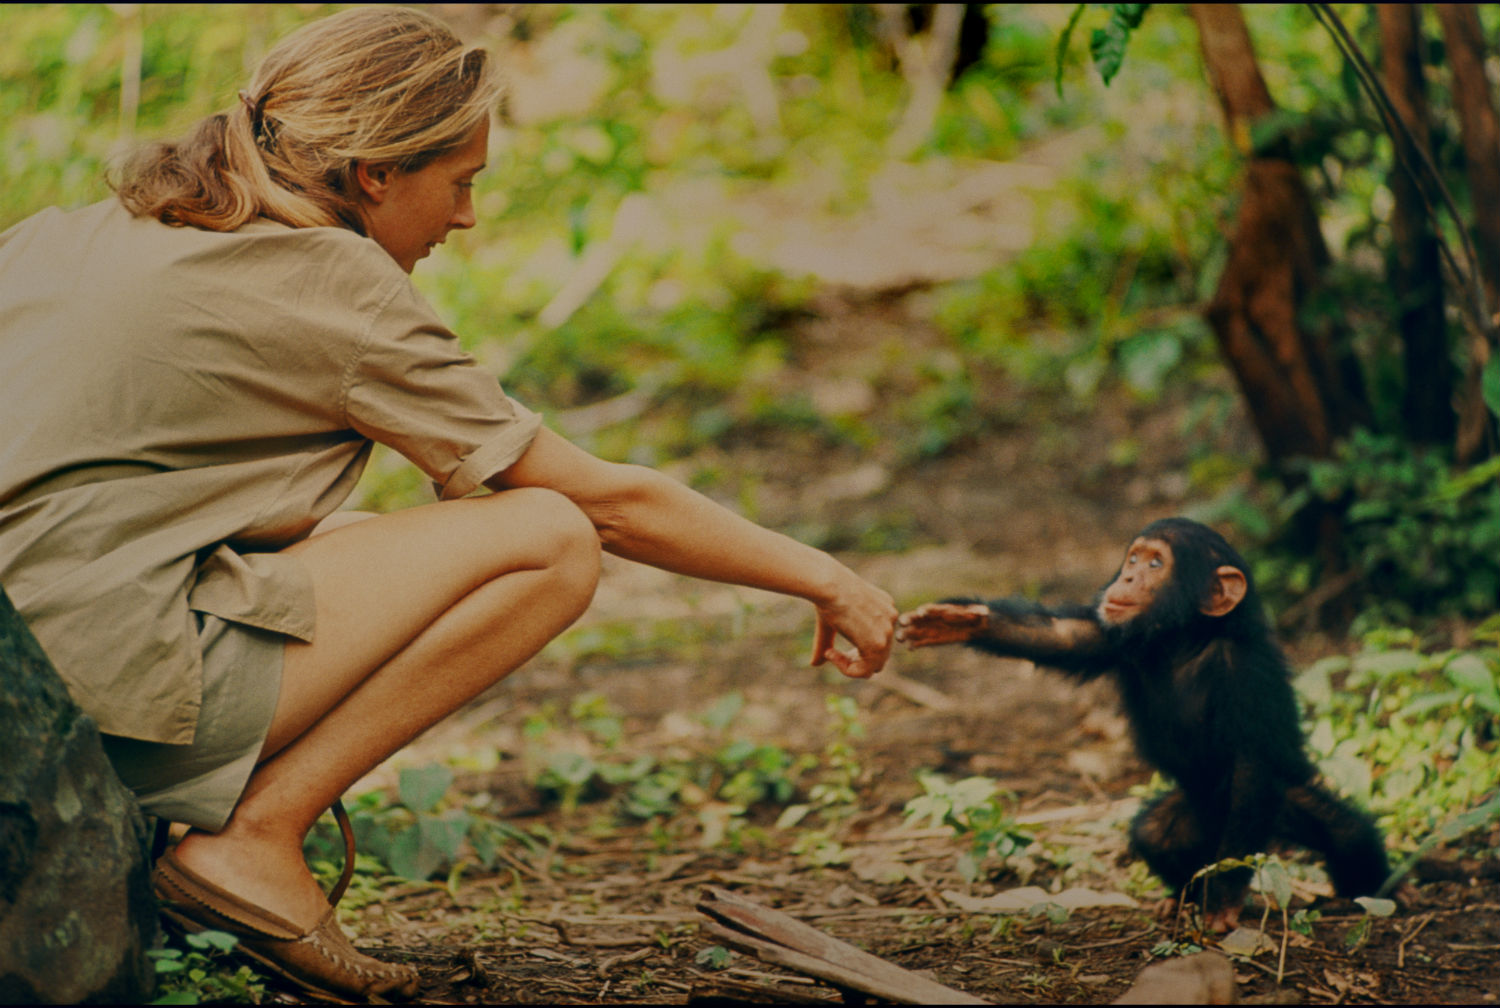 Goodall meets a young chimp.